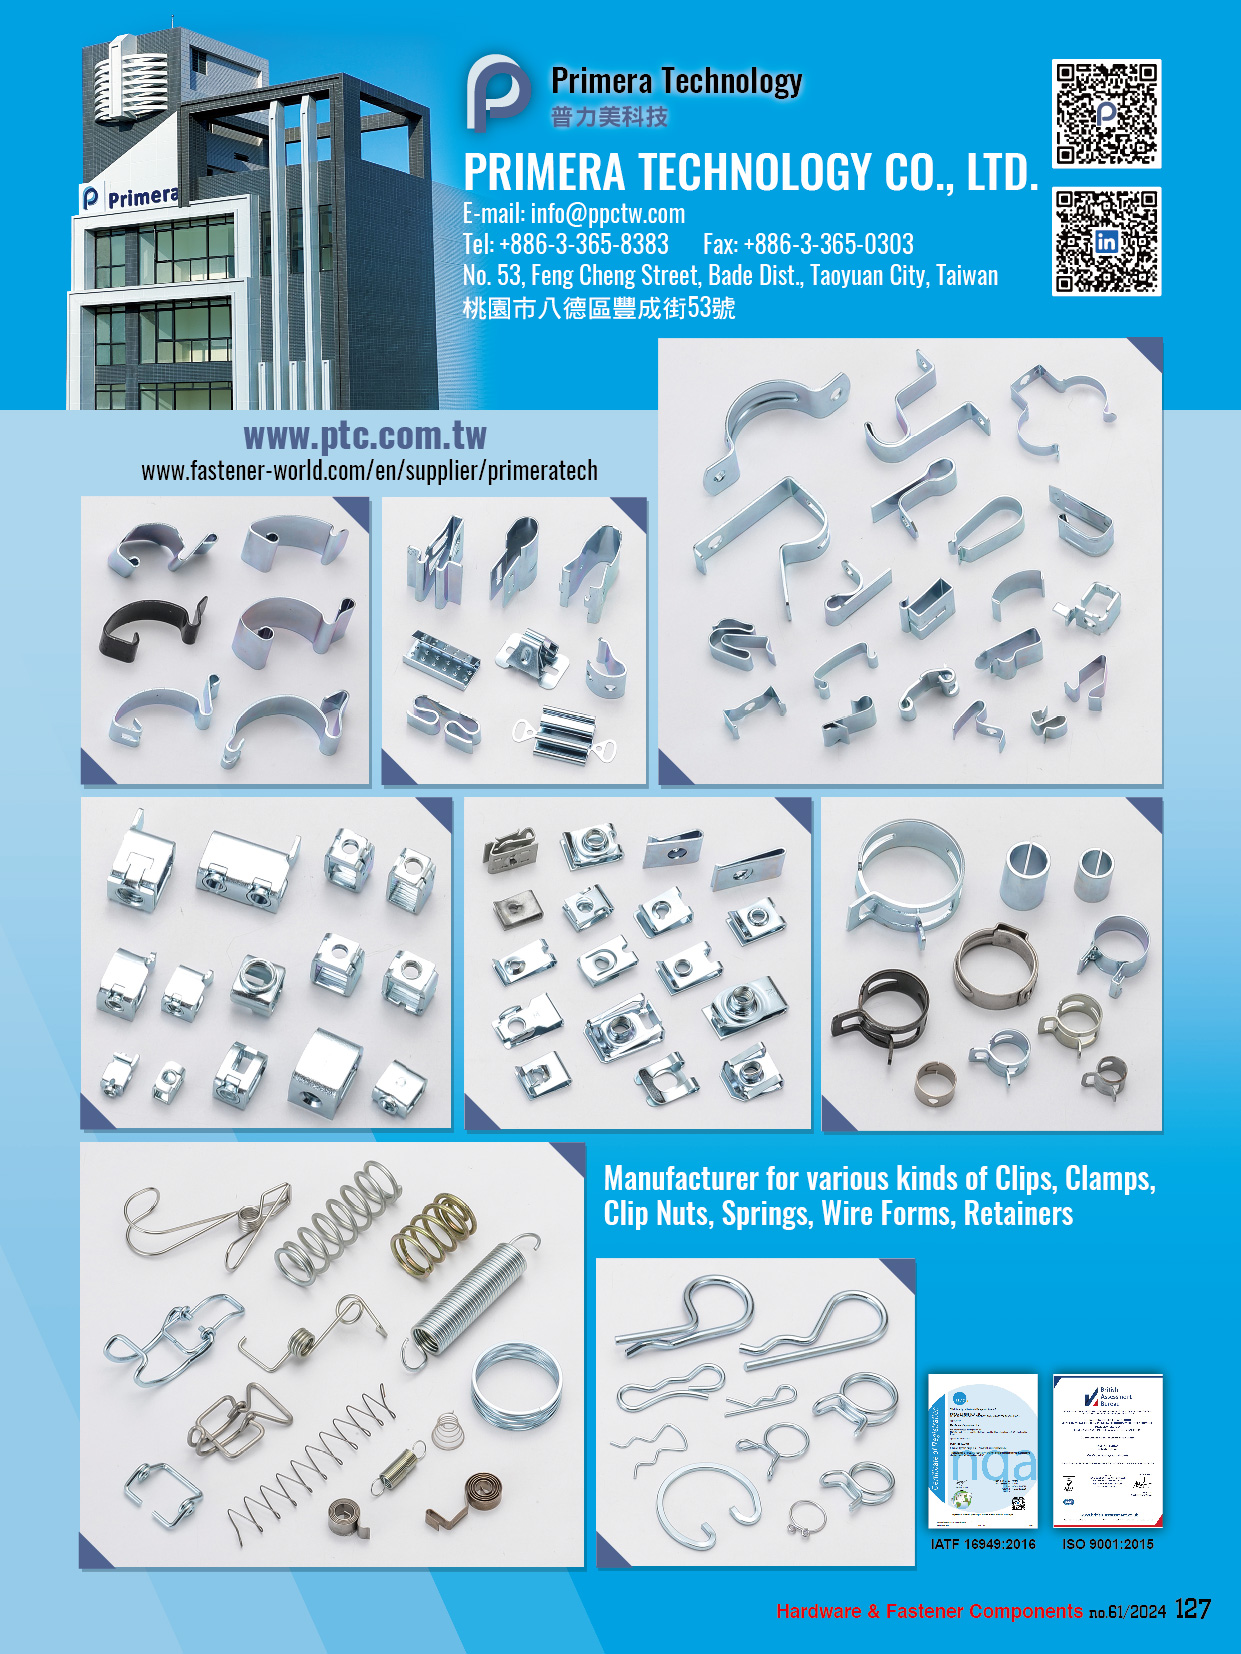 PRIMERA TECHNOLOGY CO., LTD. , Clips, Clamps, Clip Nuts, Springs, Wireforms, Retainers, Safety Spring Clamps, Finger